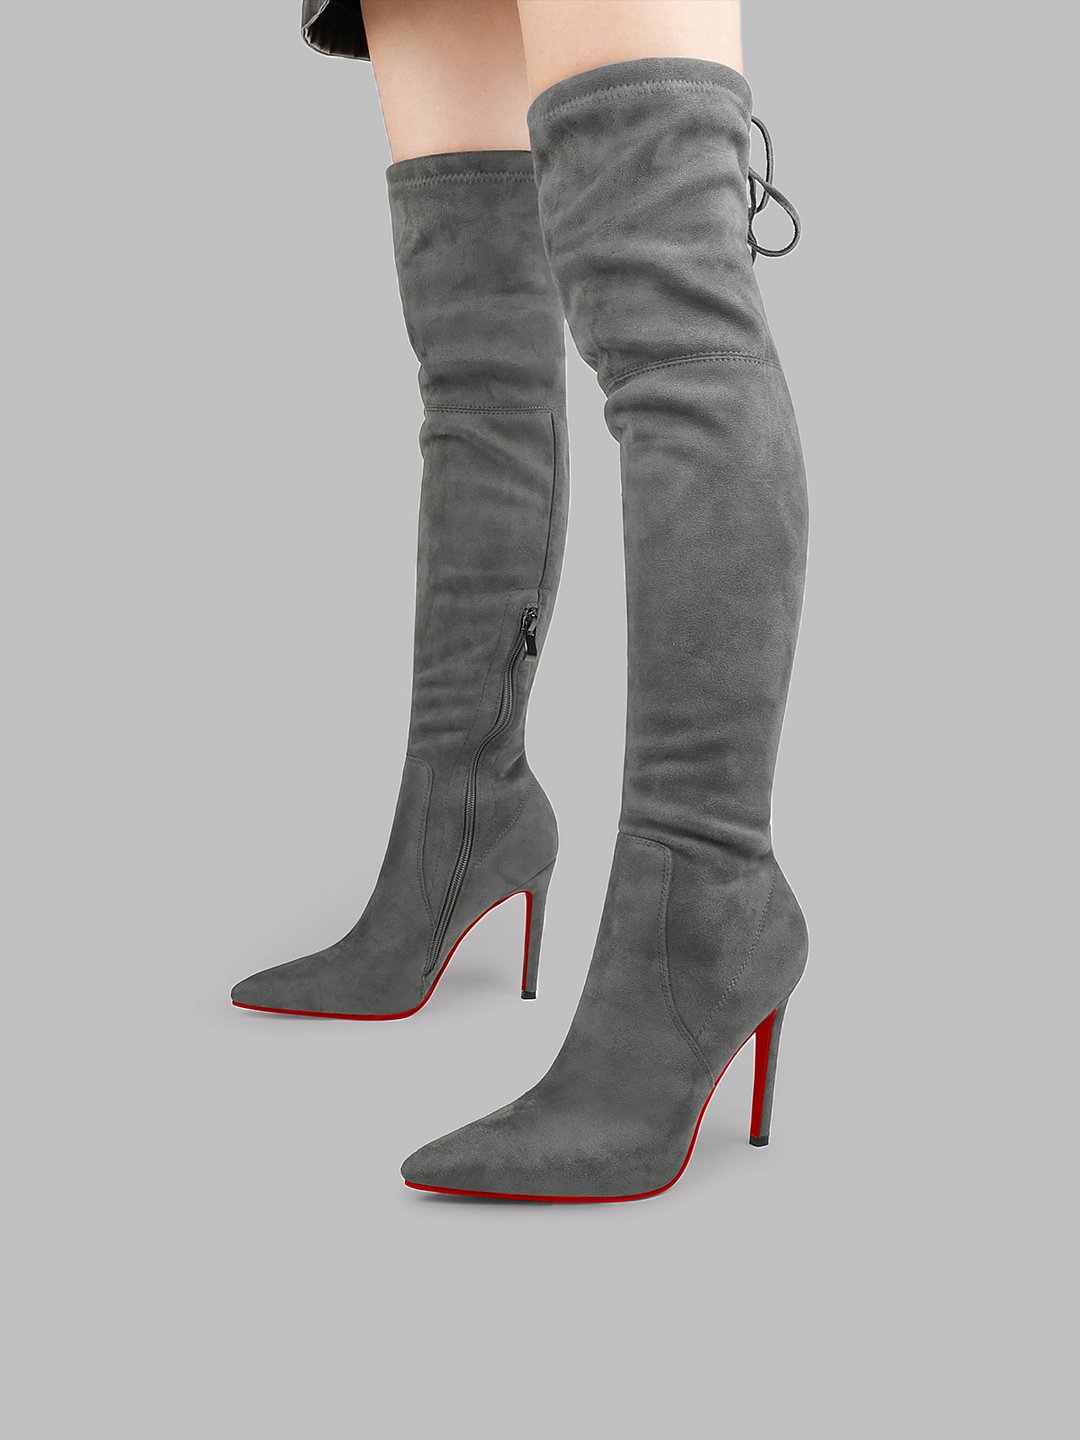 3.94“/4.72” Women's Microsuede Over The Knee High Heels Red Bottom Boots